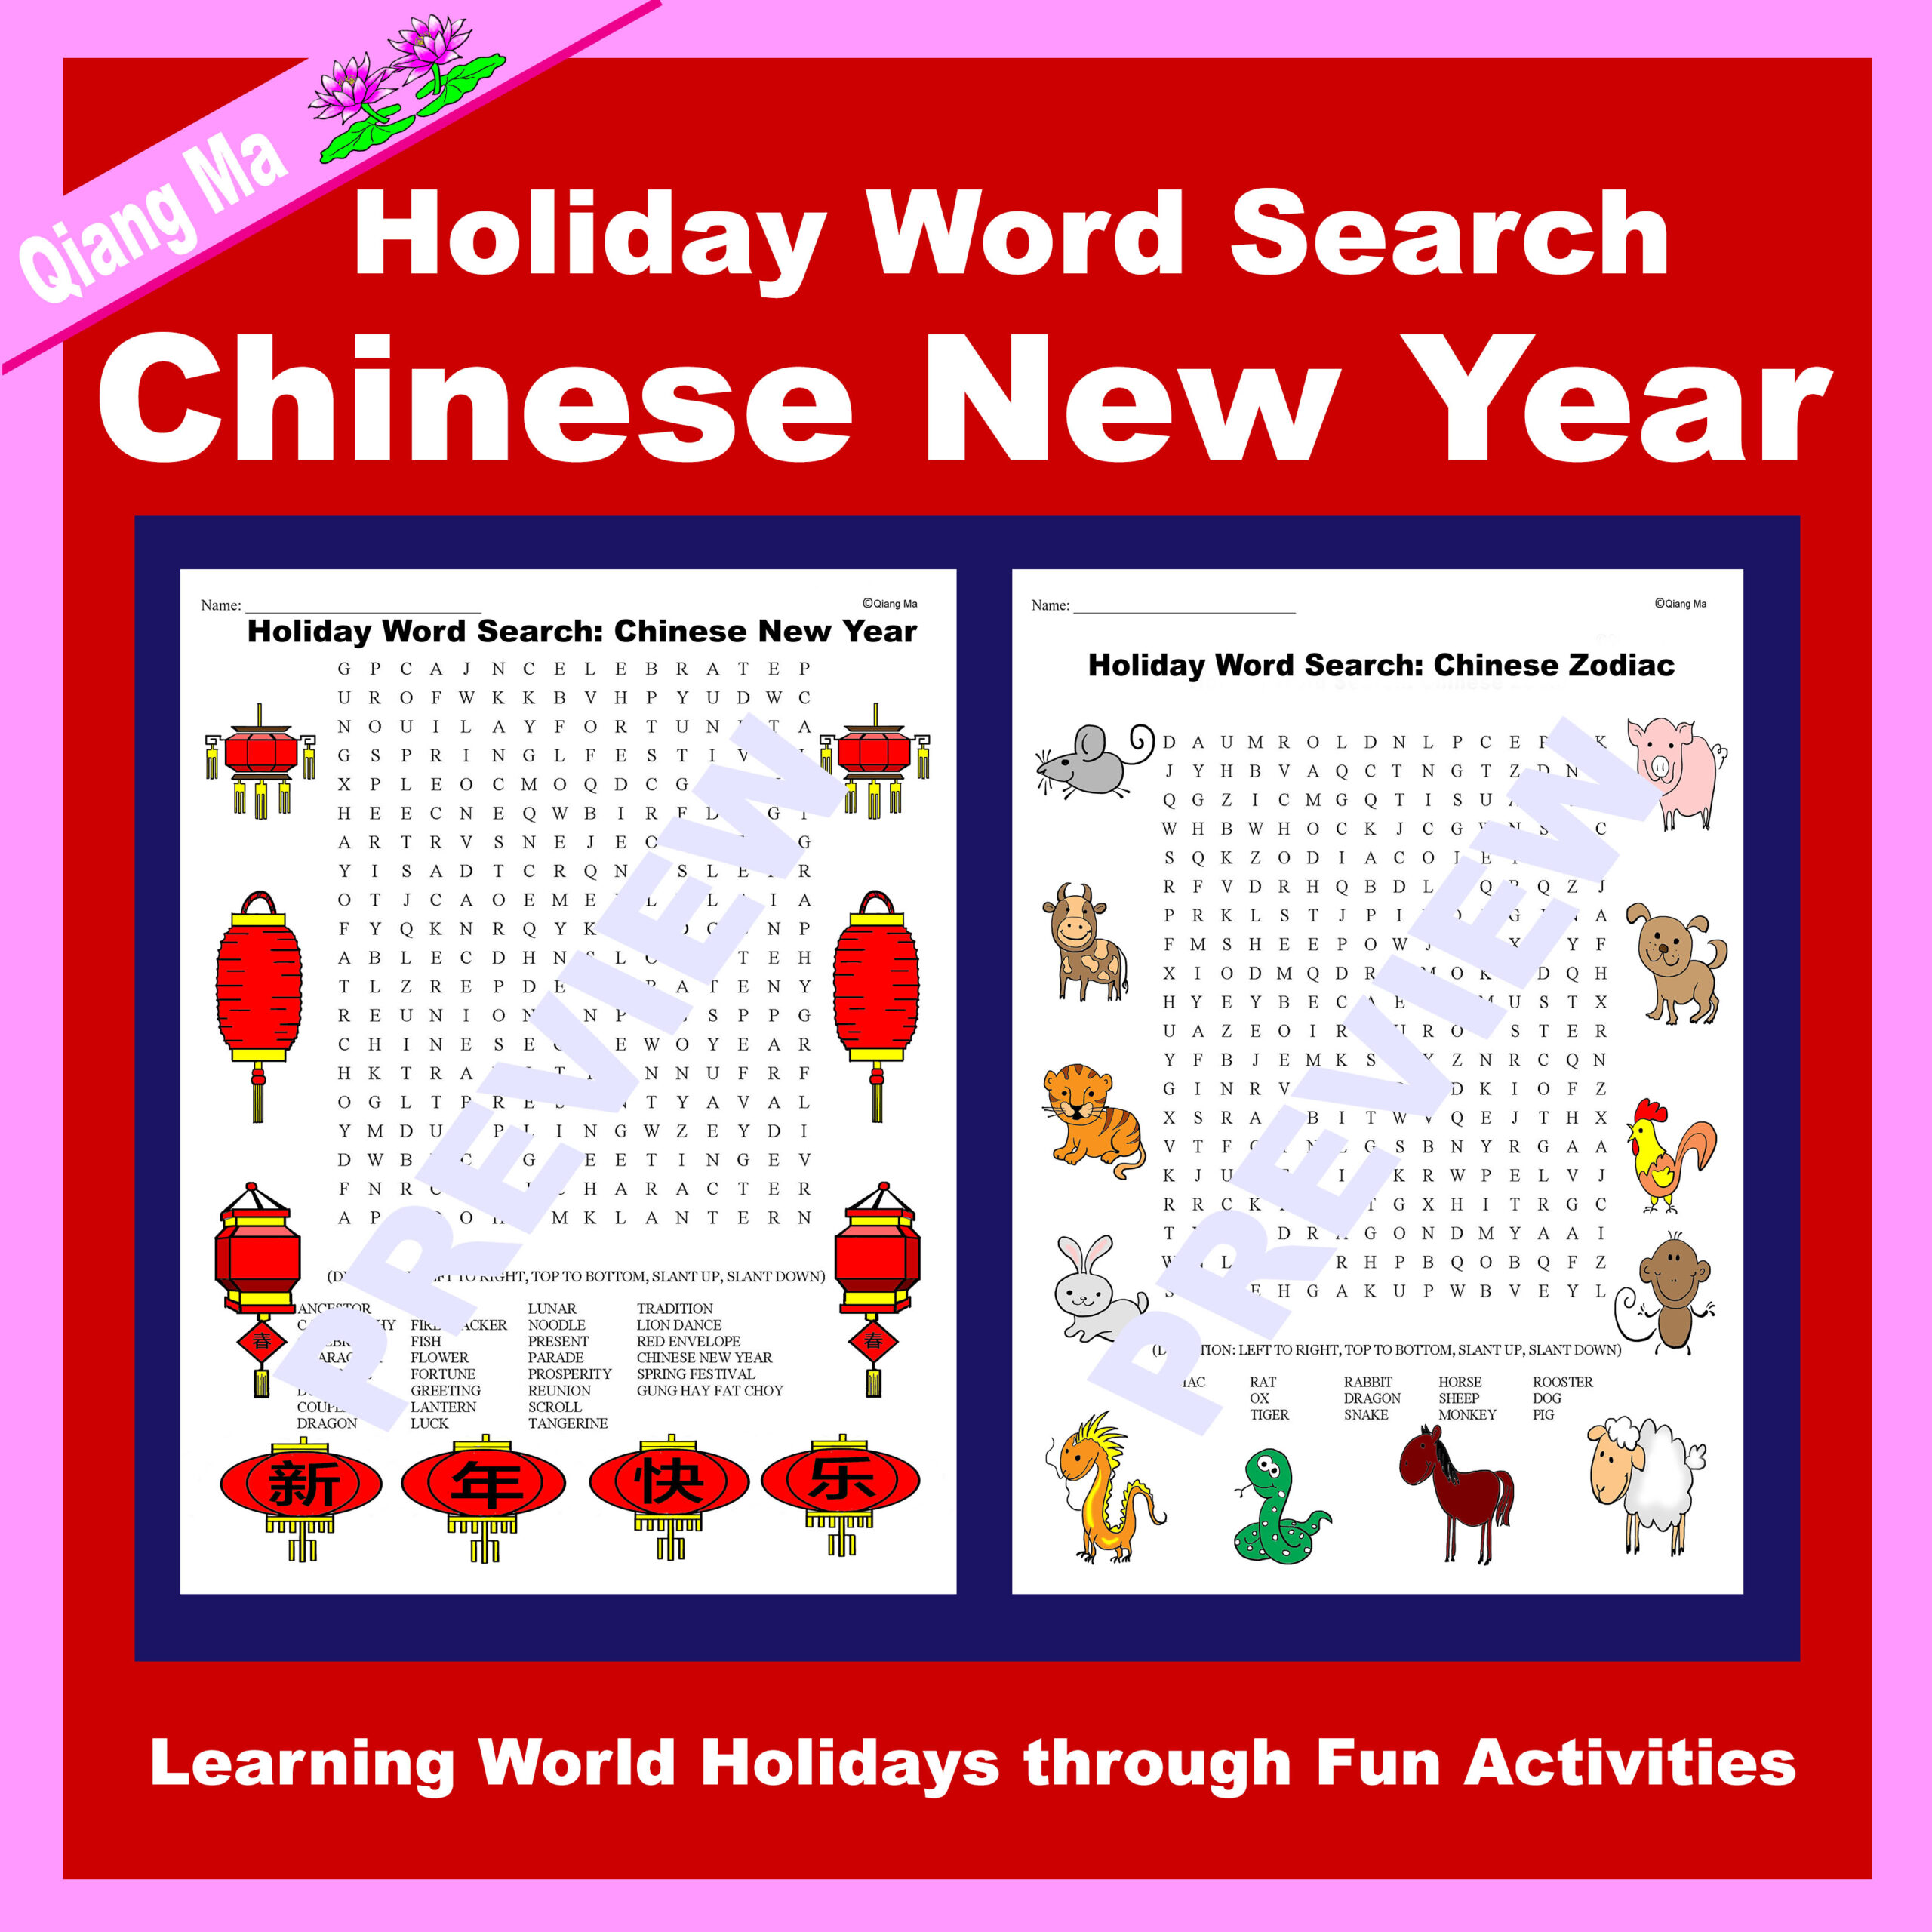 Holiday Word Search: Chinese New Year's featured image